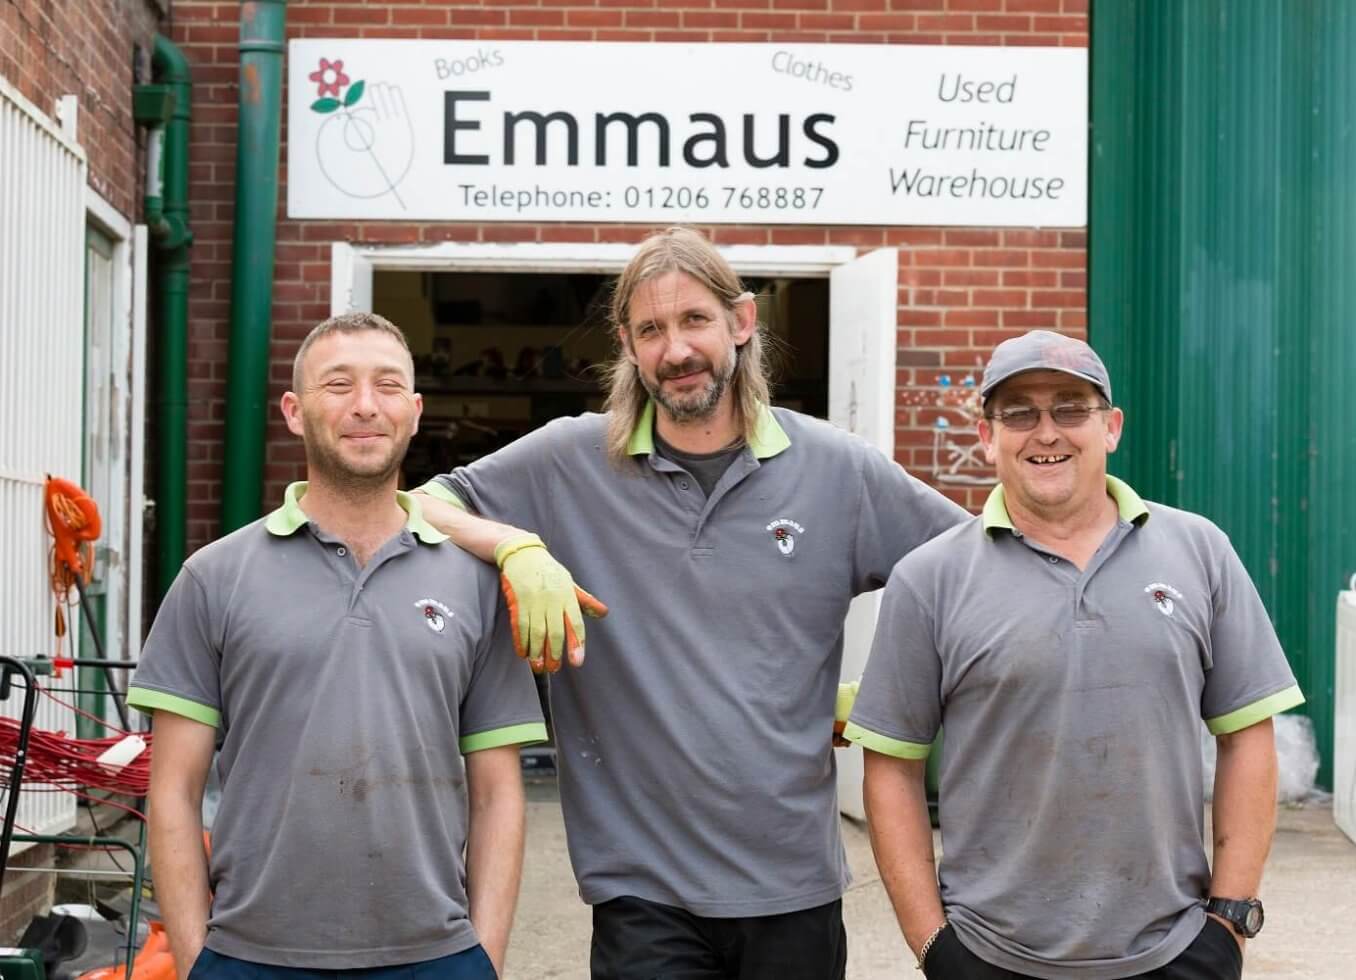 Emmaus in the UK